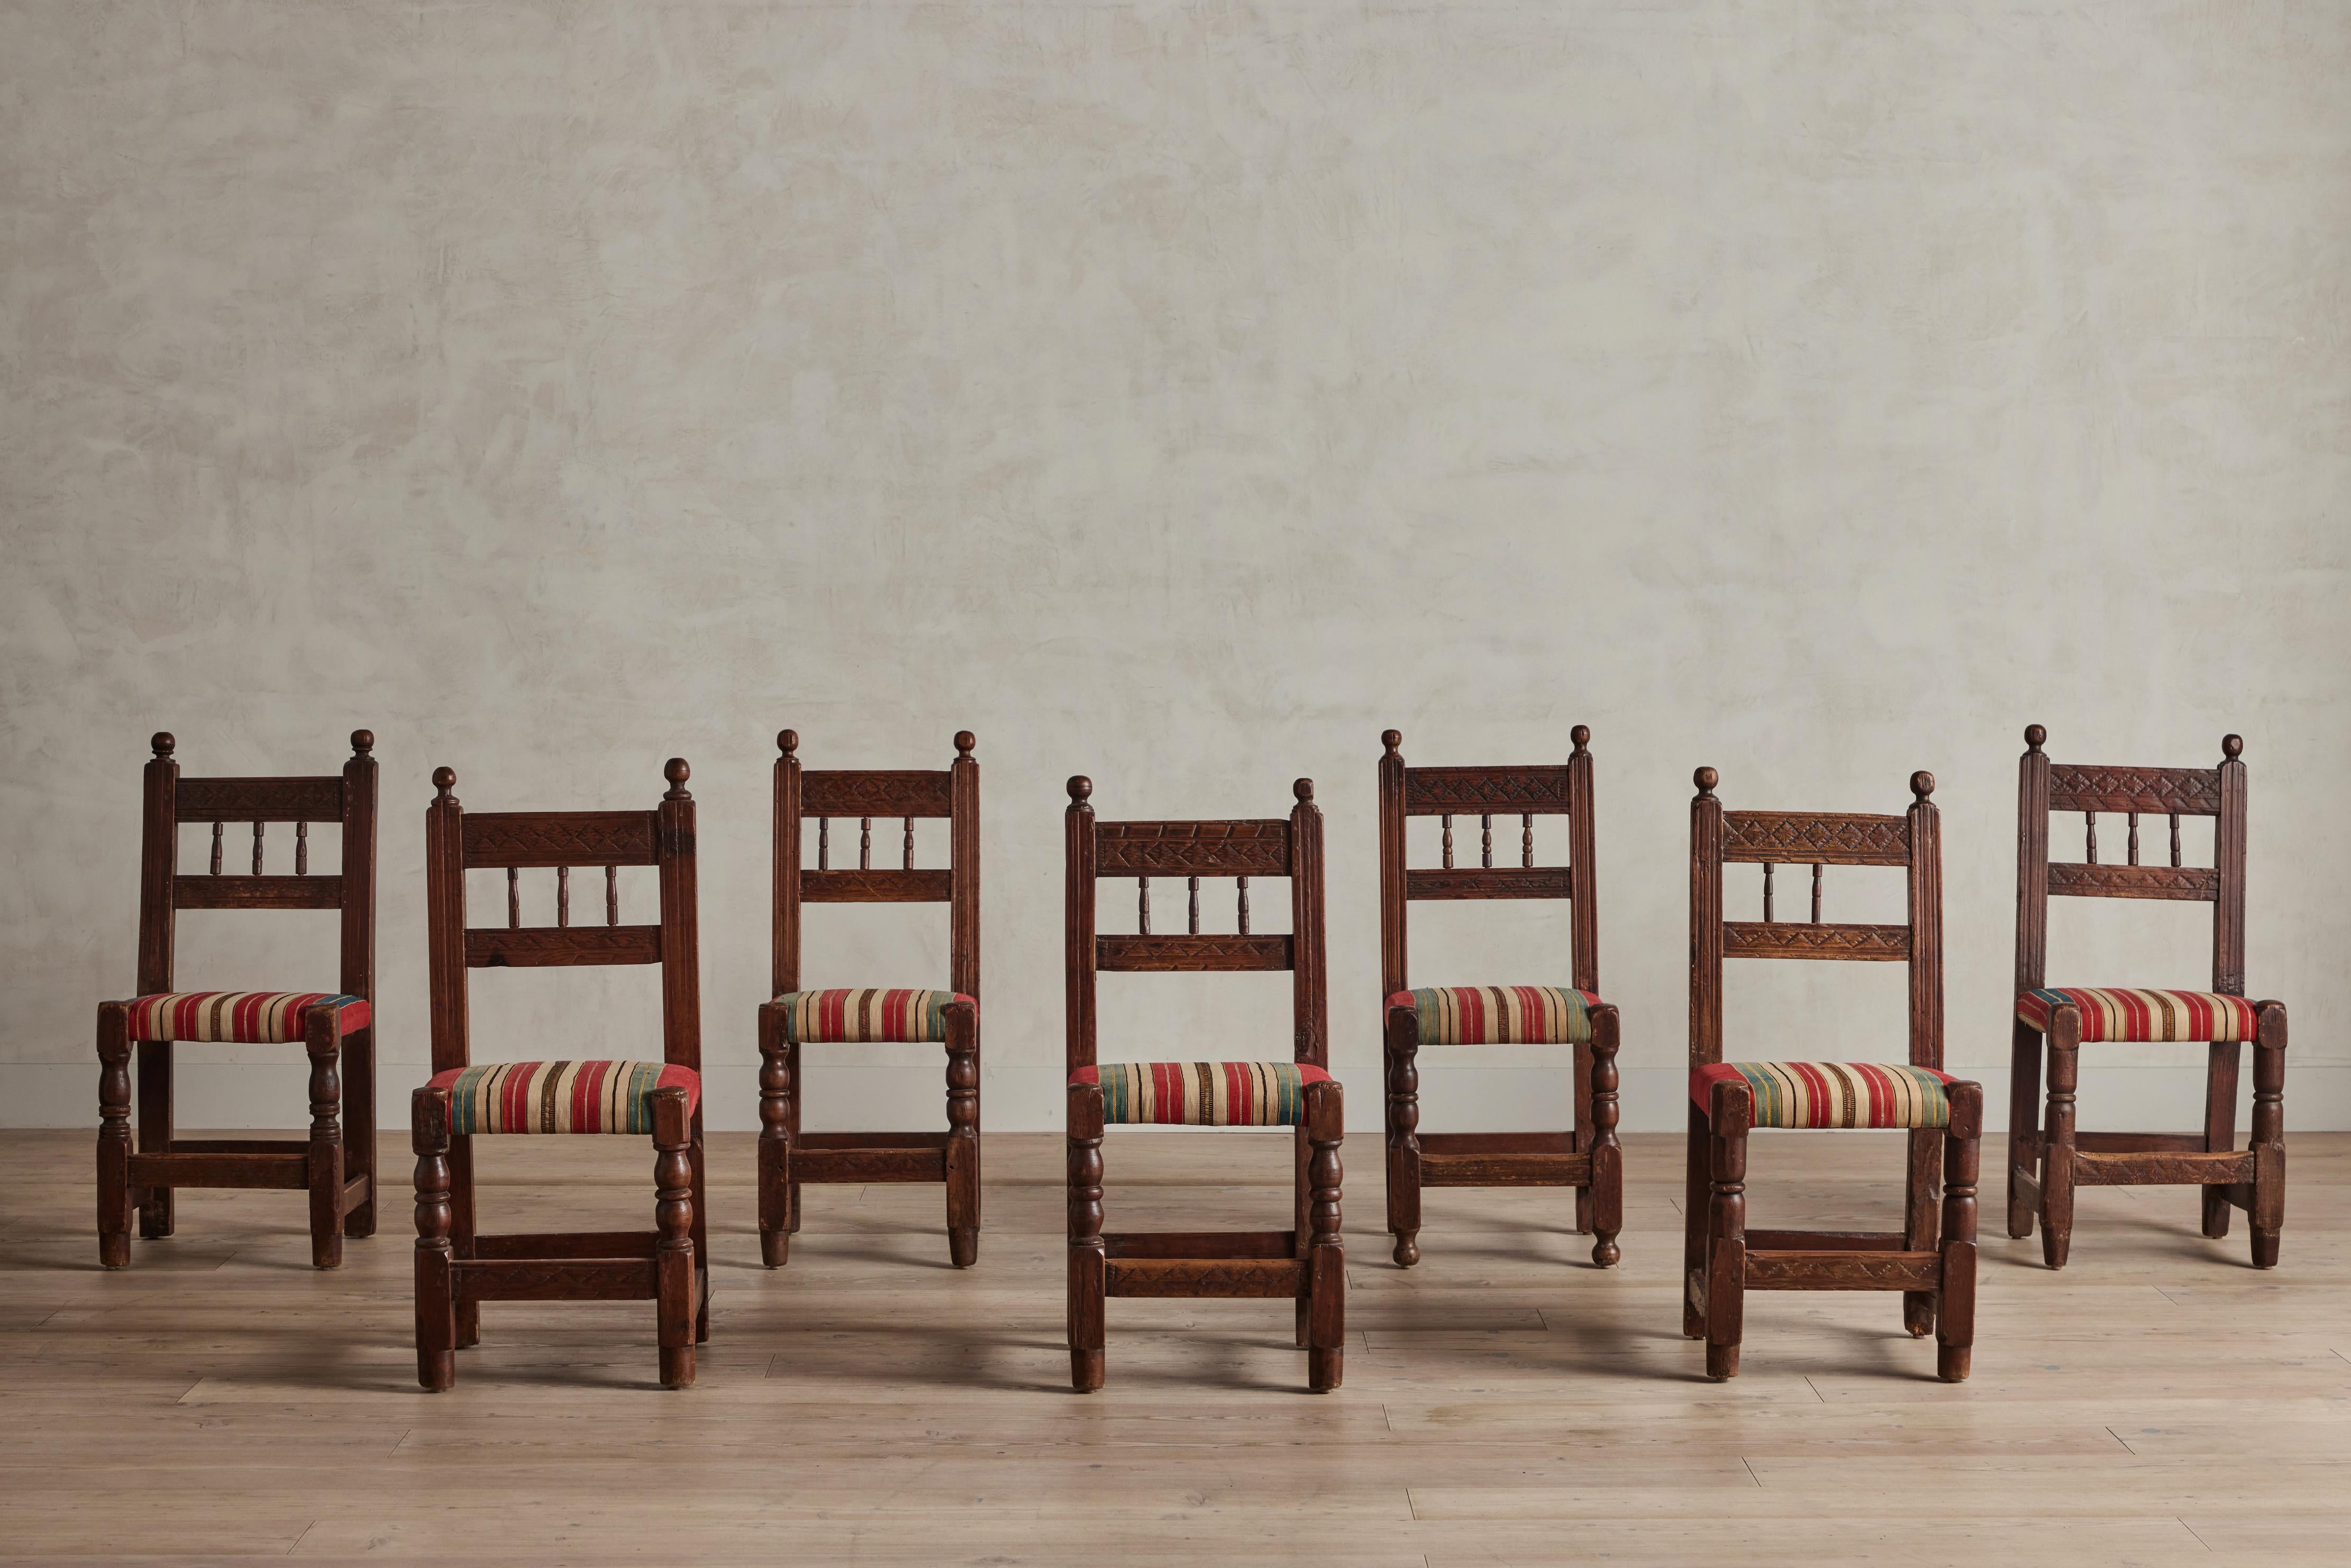  Set of seven carved wood dining chairs from Spain circa 1920. Newly upholstered in a striped French cotton and silk blend woven textile. There is wear throughout on the wood and fabric that is consistent with age and use. One chair is missing a